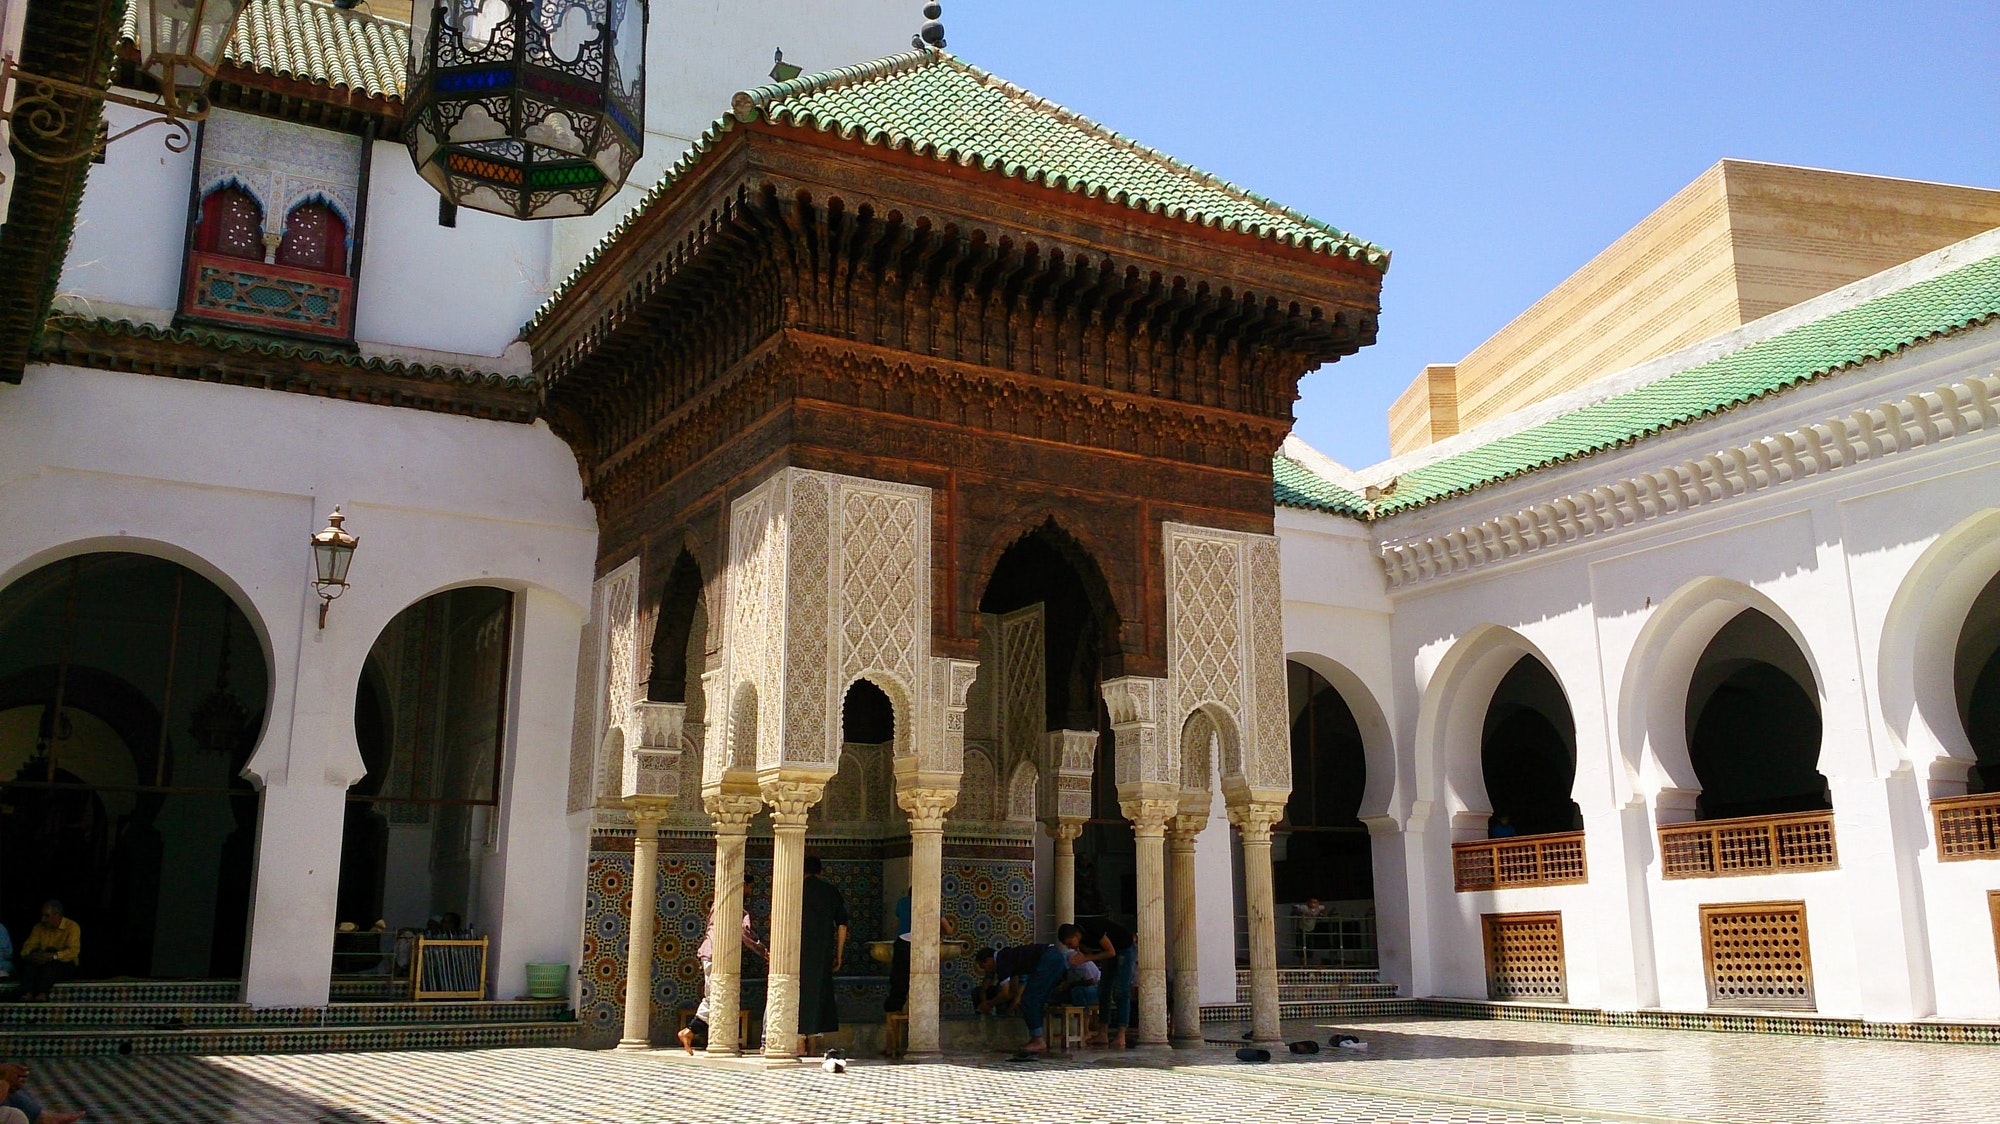 Al-Qarawiyyin Mosque in Fez, the oldest university in the world